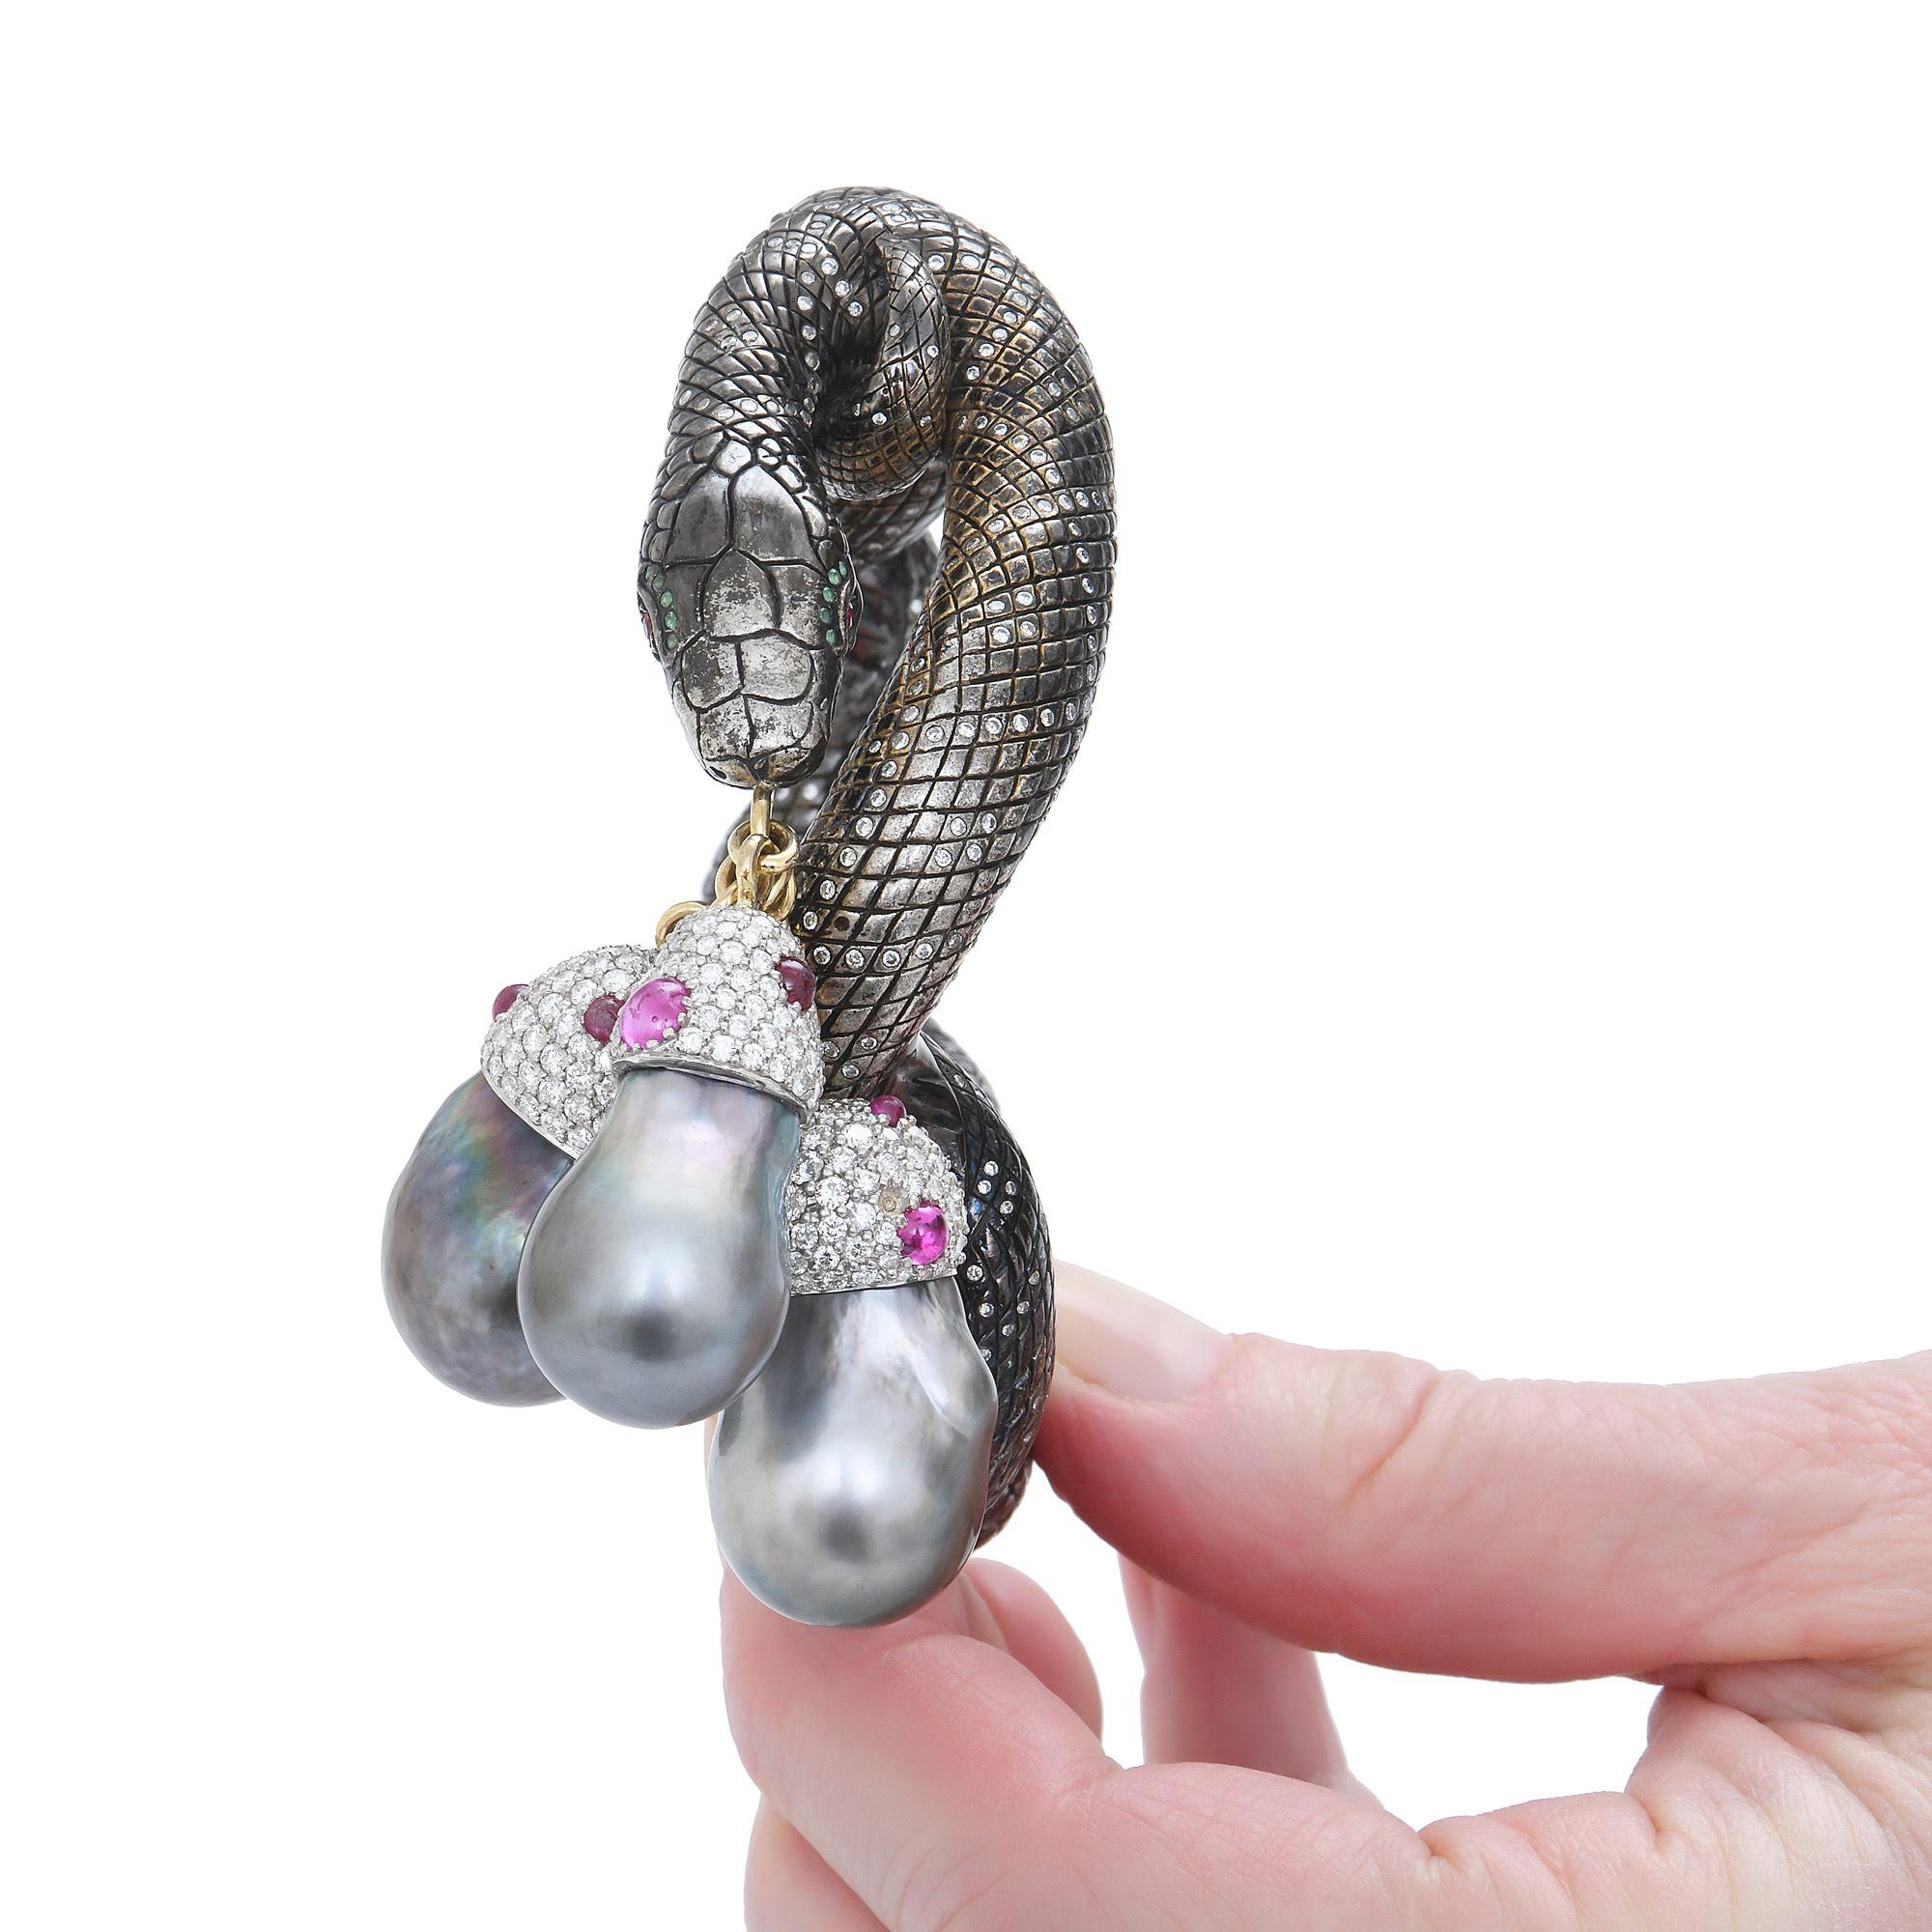 Bracelet in form of a twisted snake in rodium silver and black gold adorn with diamonds. 
From the mouth three baroque south-sea pearls with a diamonds top are suspended.
White diamonds : 11,97 cts
South sea pearls : 133,8 cts